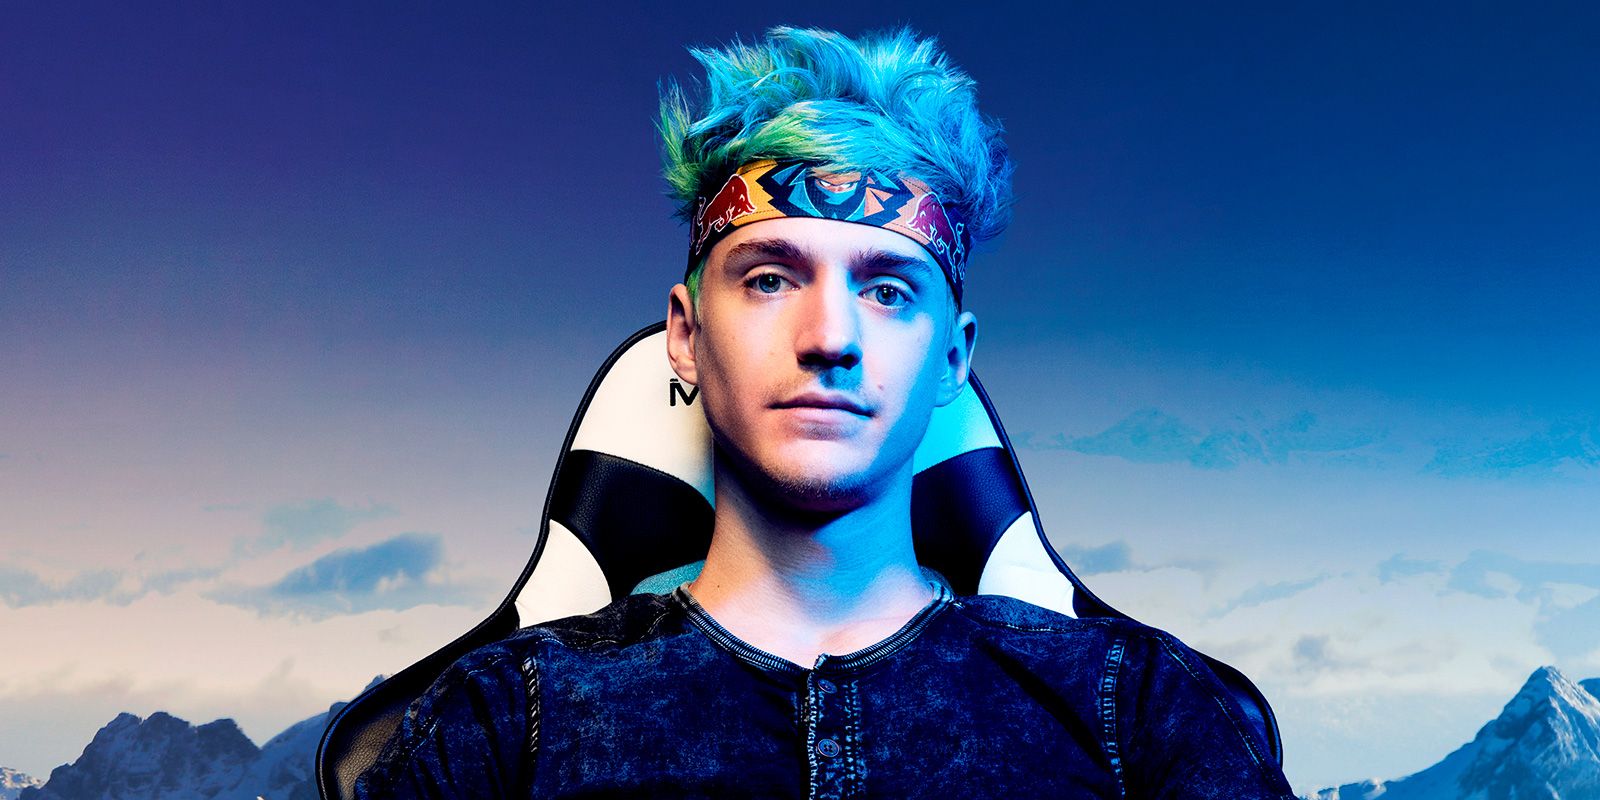 Ninja has returned Twitch, one year after signing a $50m Mixer deal | VGC